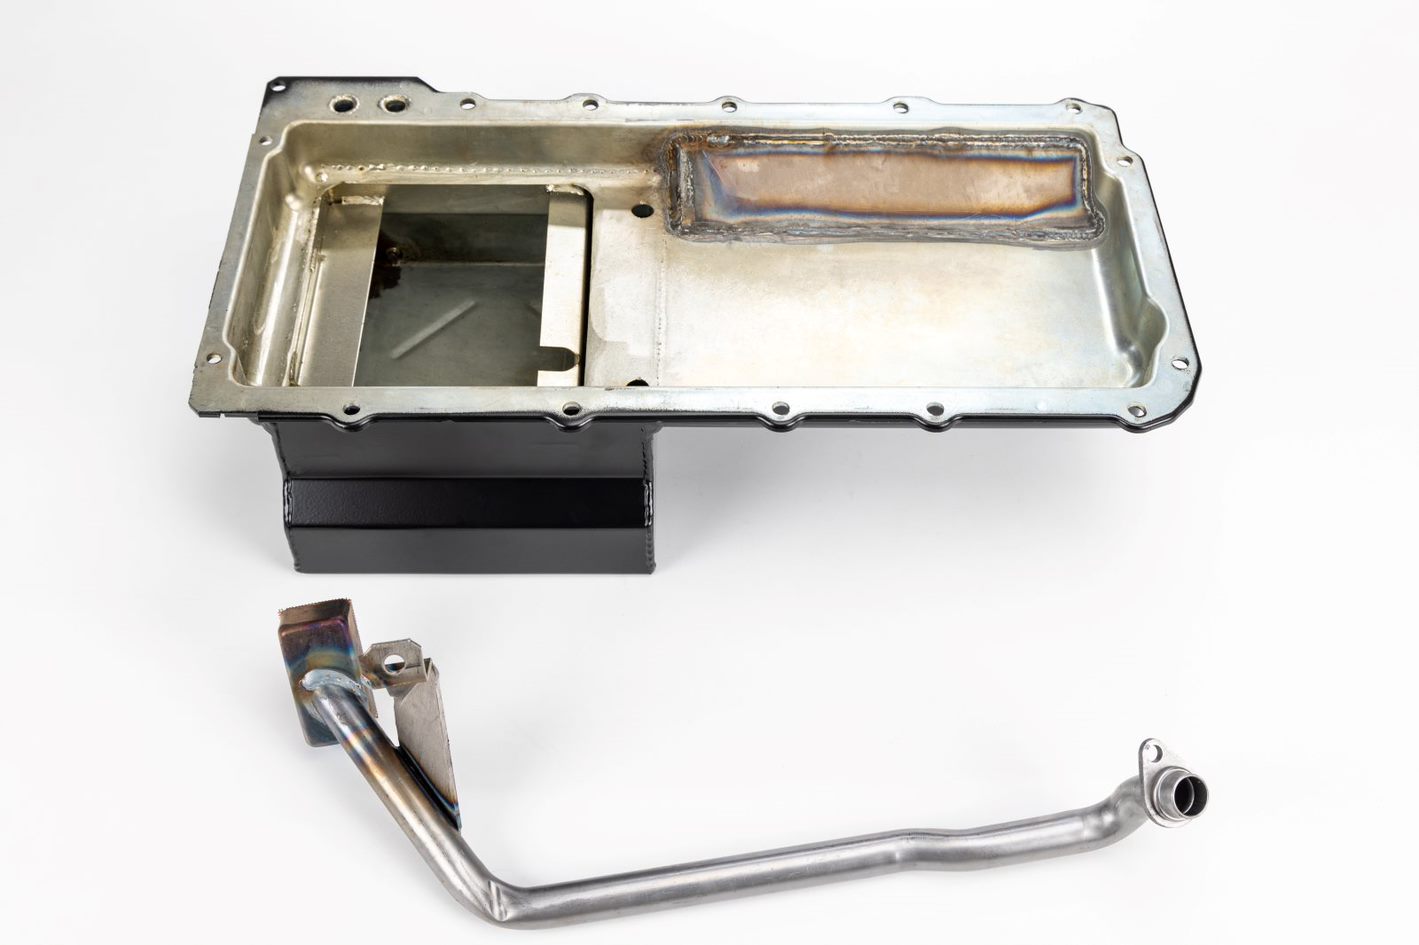 top of the custom oil pan and pickup tube for the 1982-1991 Porsche 944 LS Swap Kit